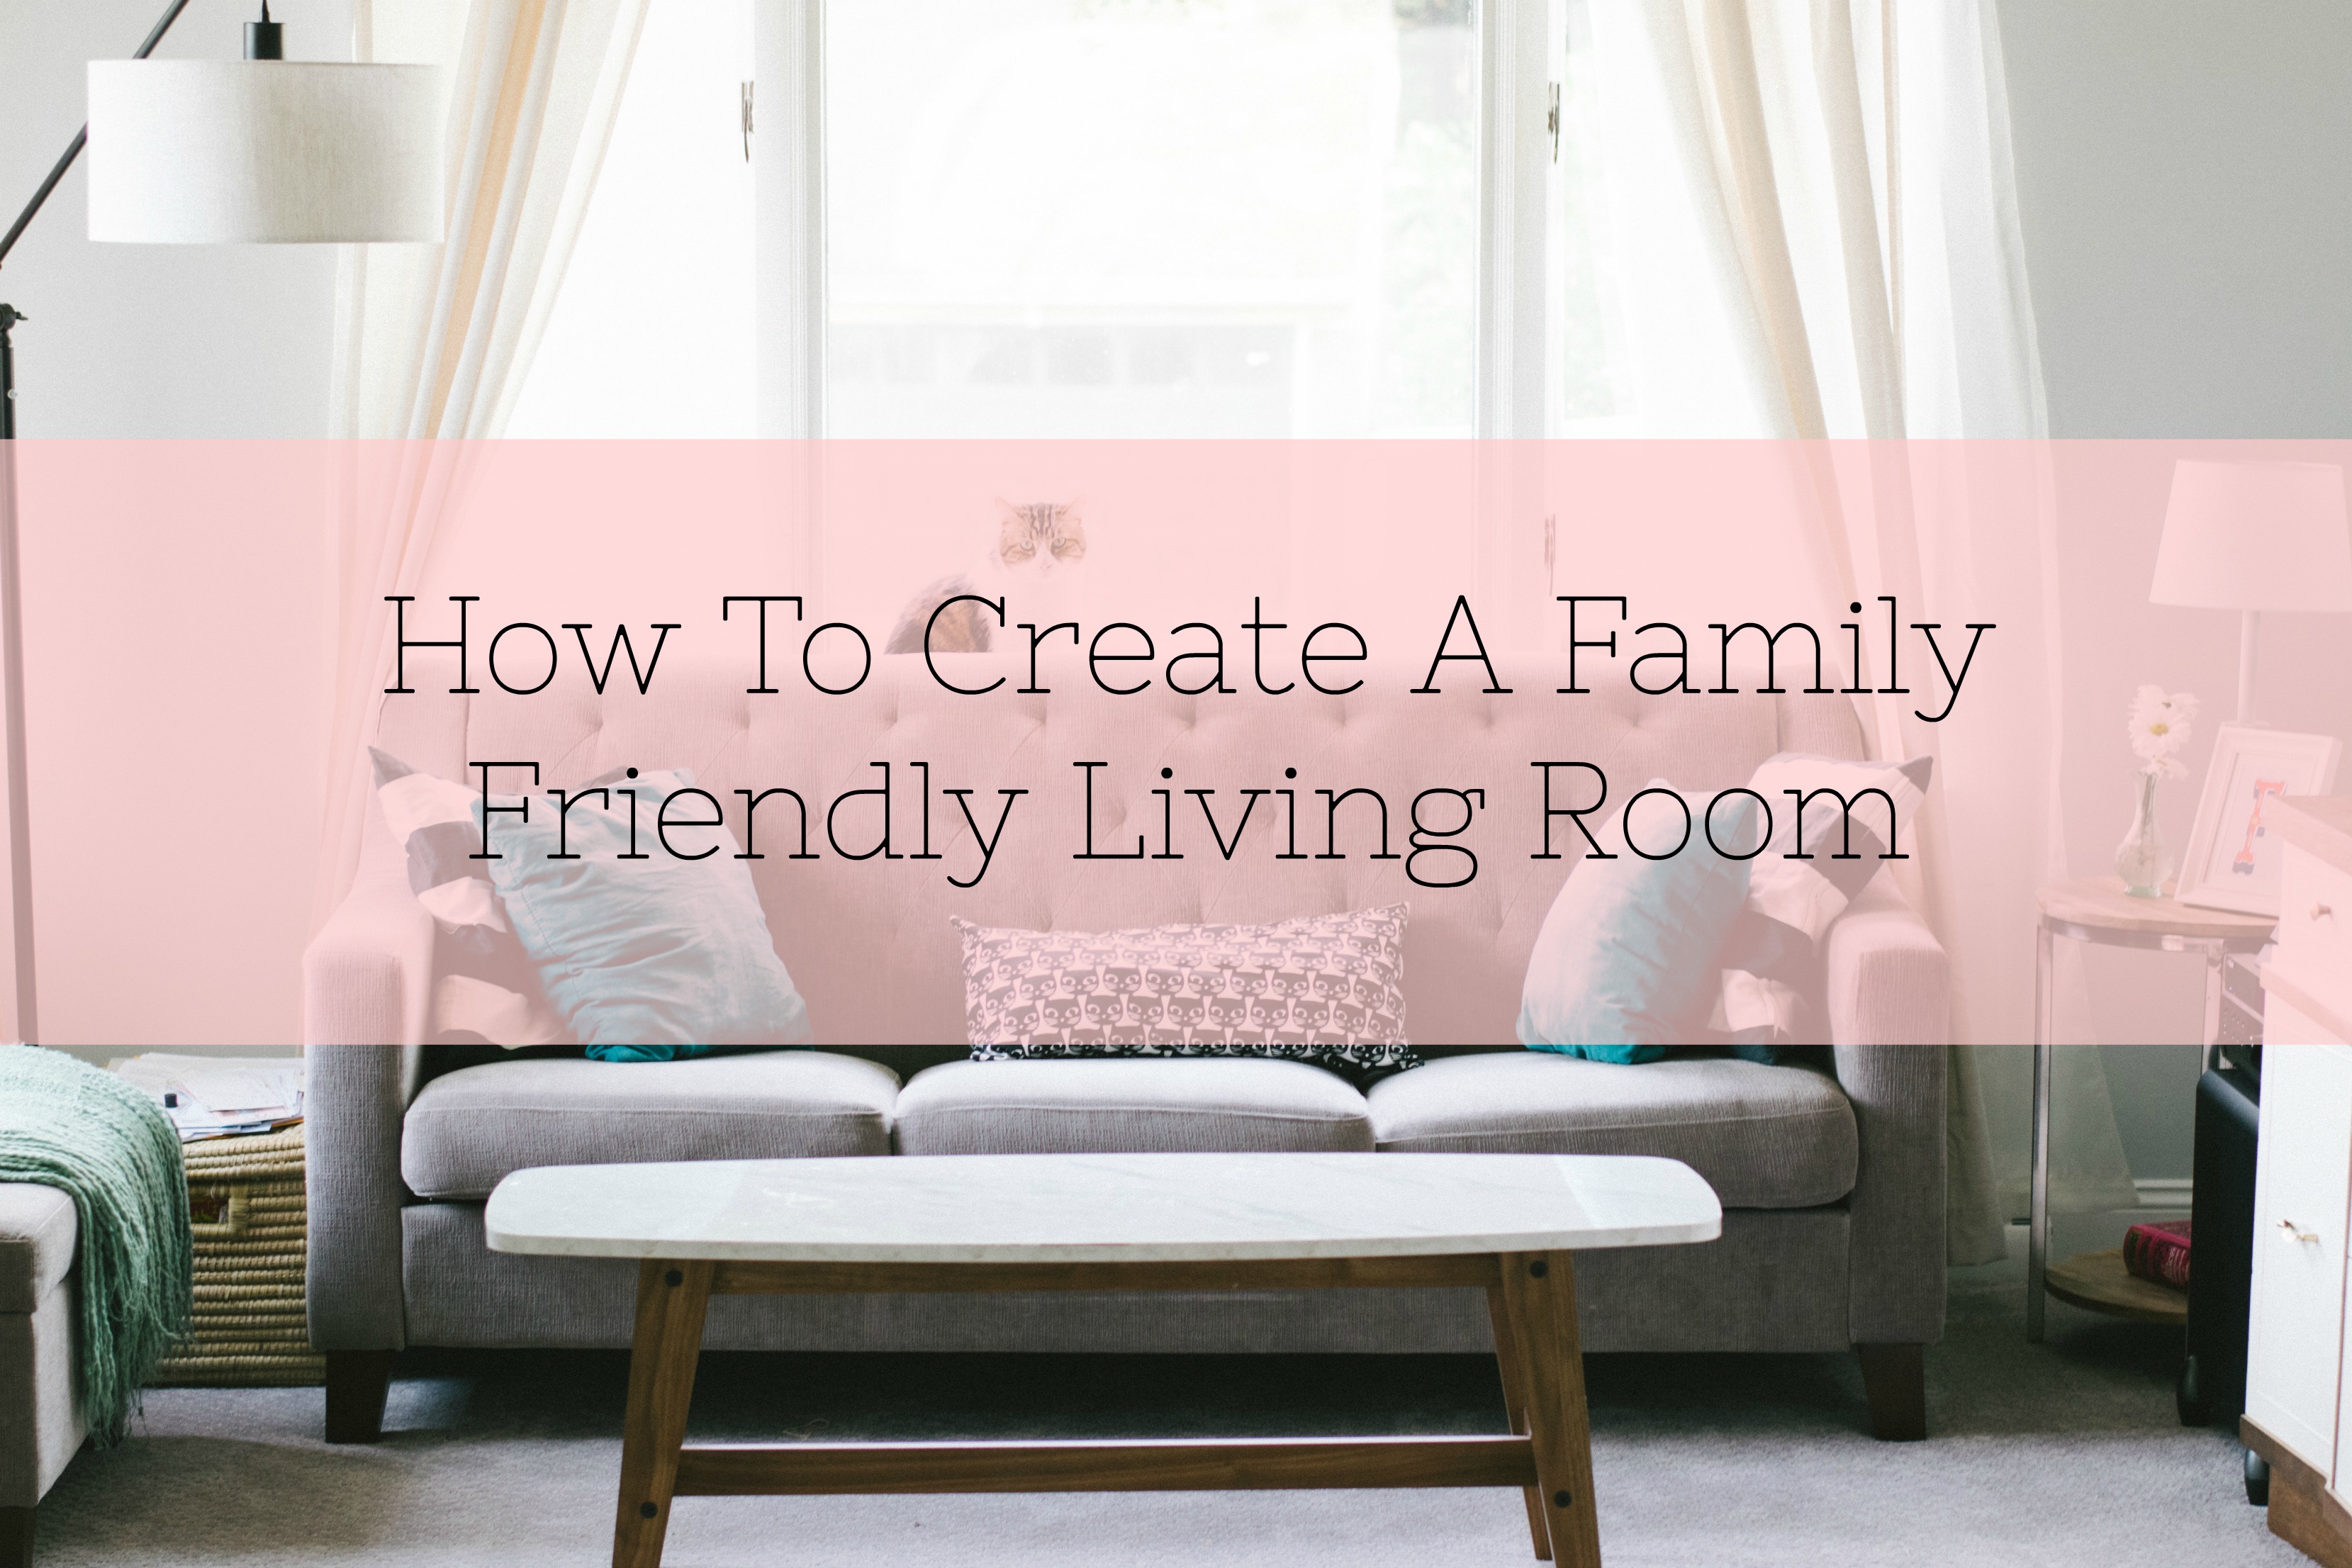 How To Create A Family-Friendly Living Room title